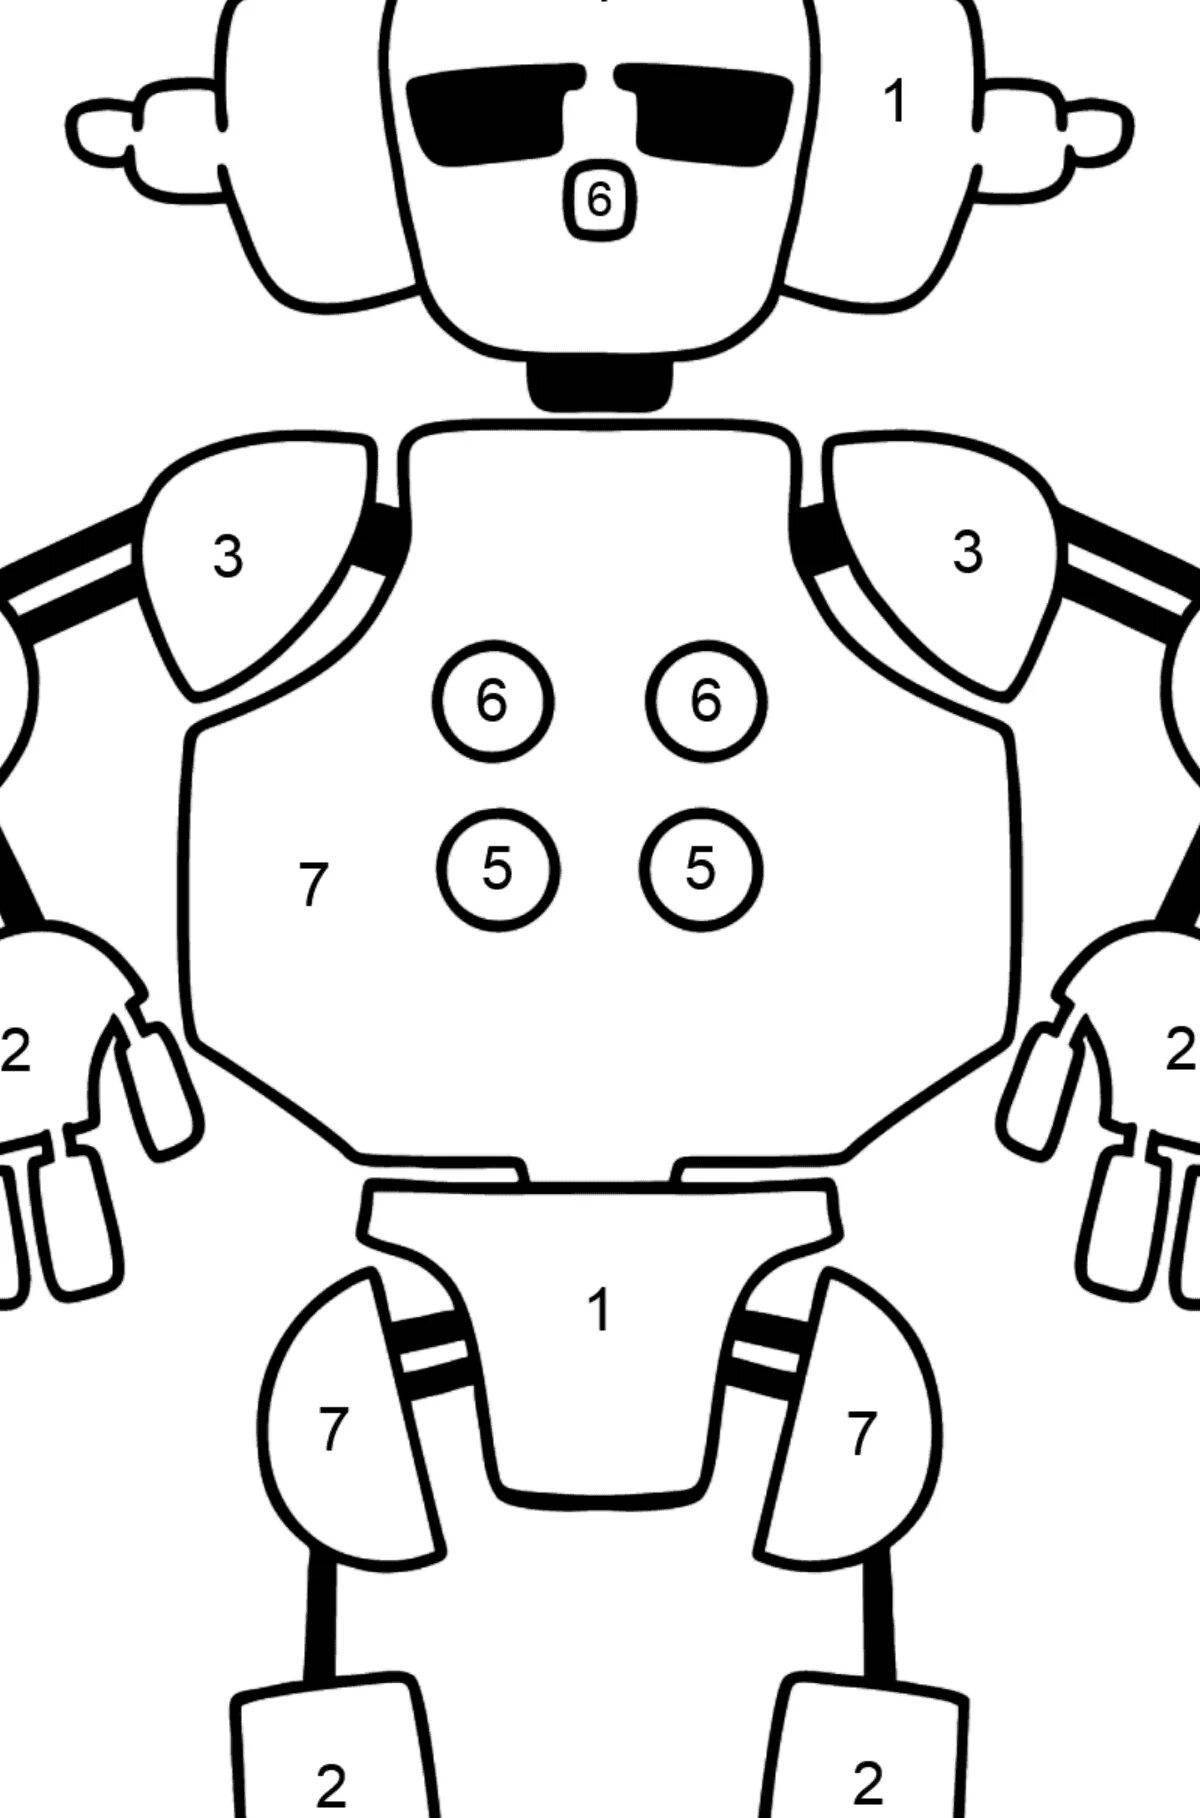 Robot by numbers #4